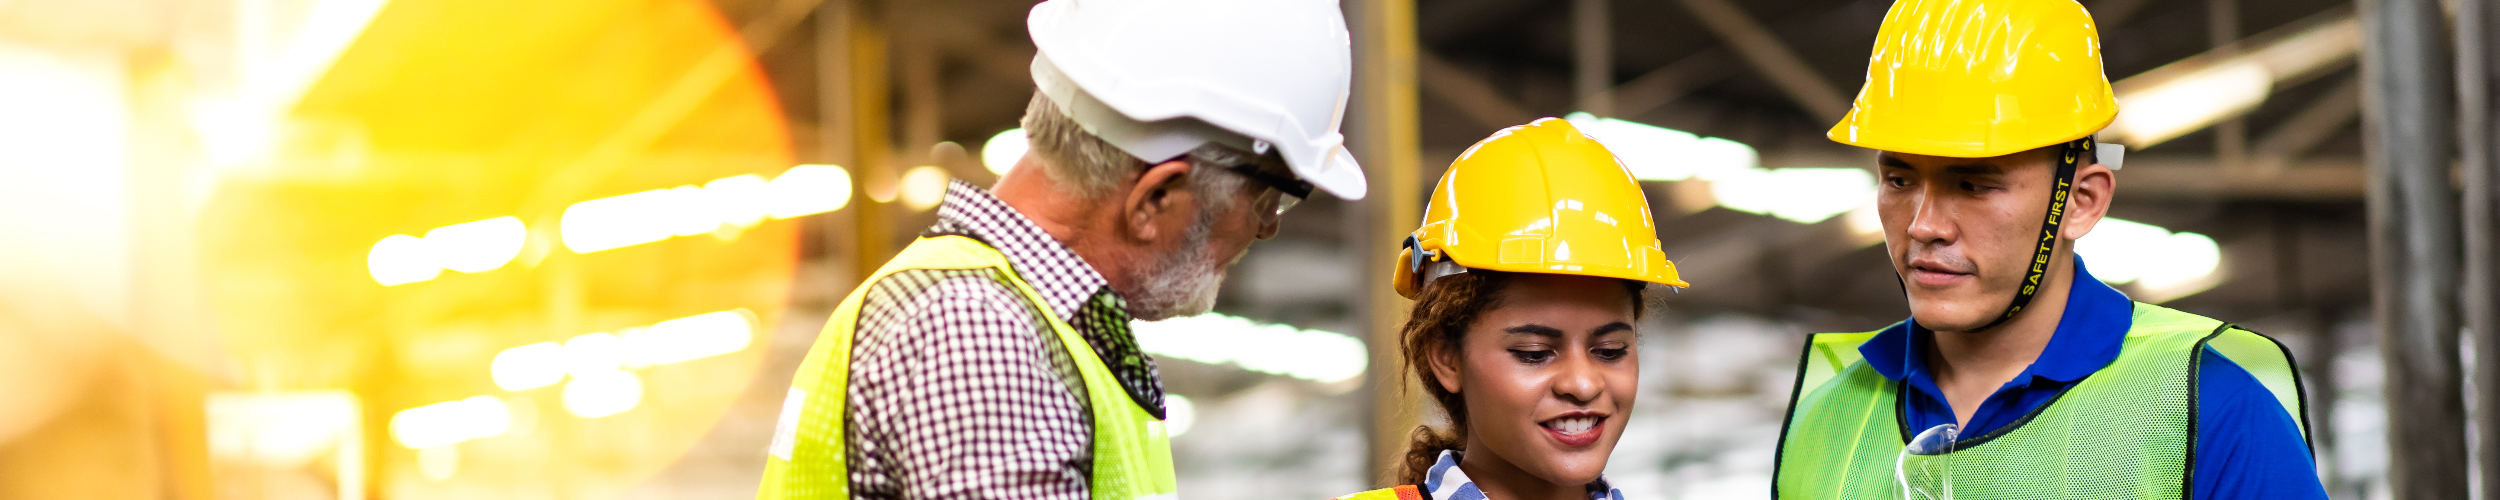 Two Men And Woman In Hard Hat And Construction Uniform